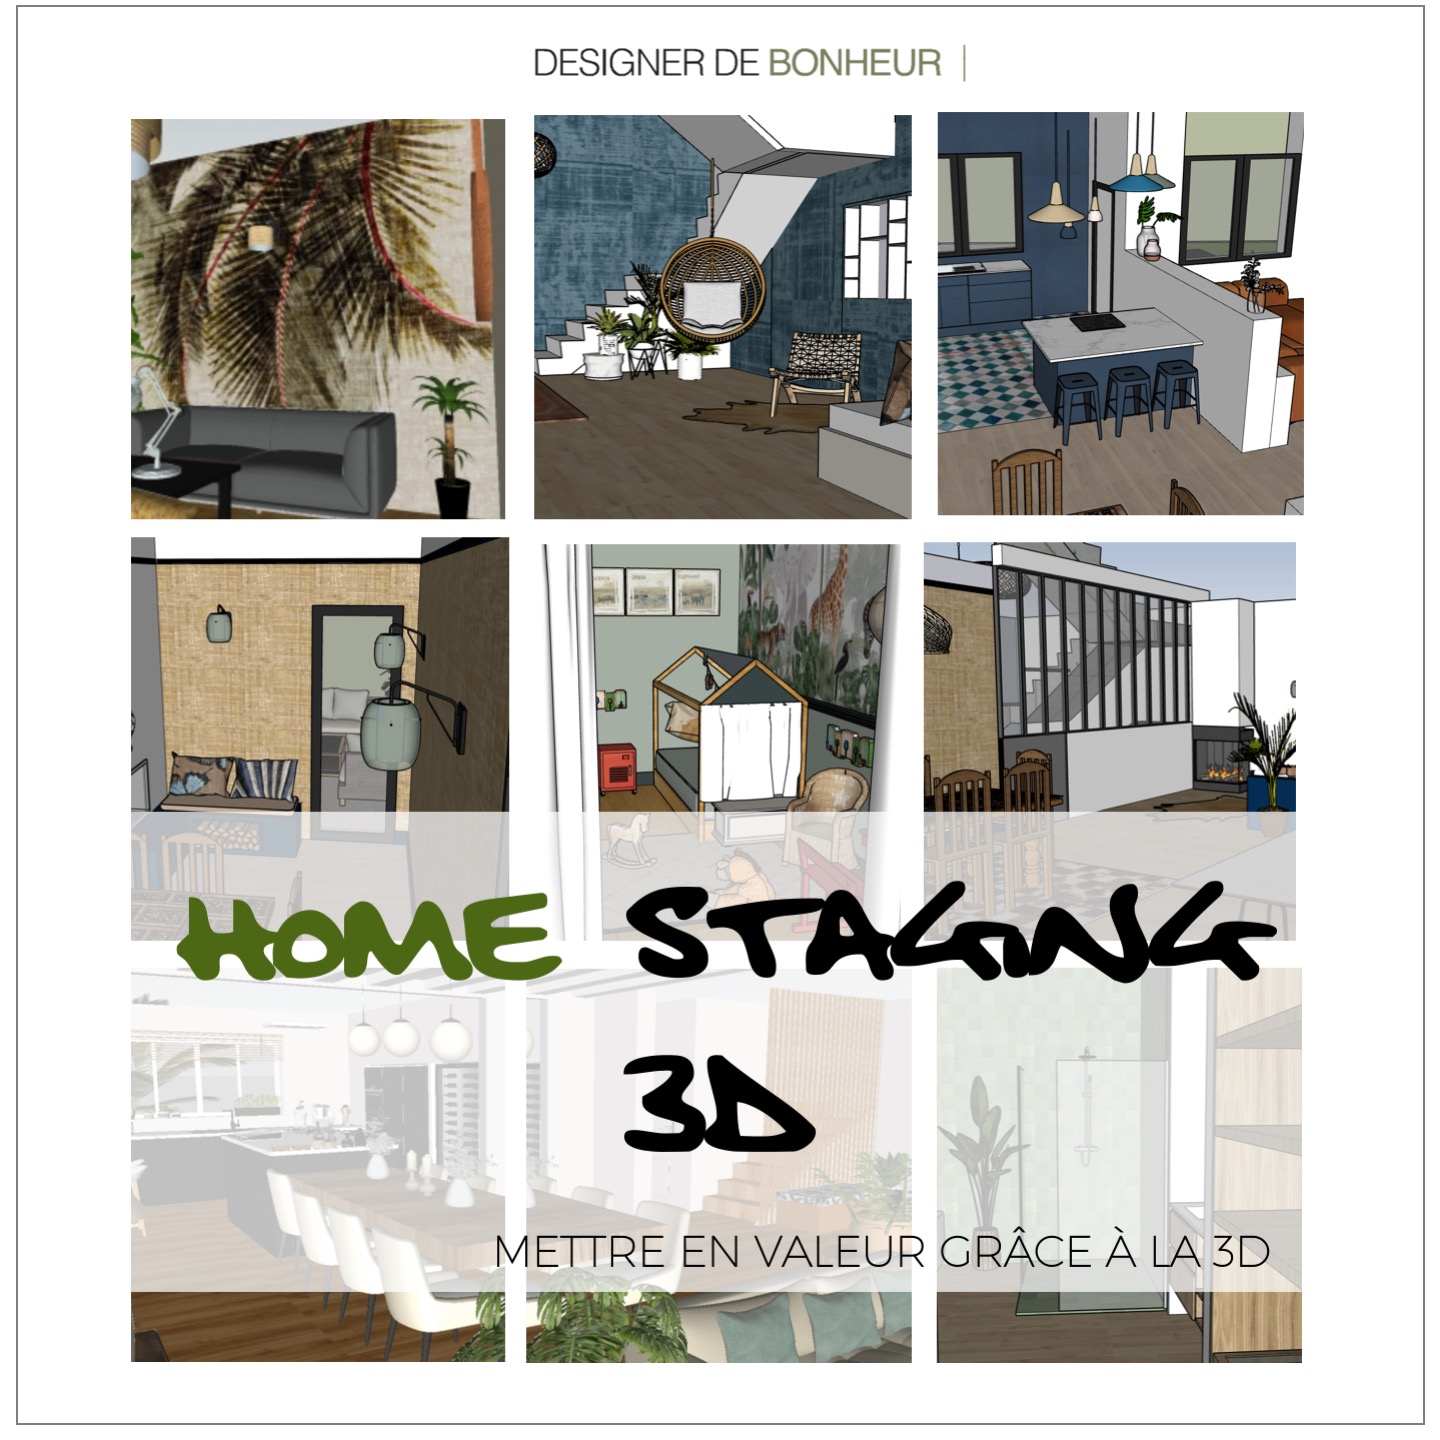 Home staging 3D